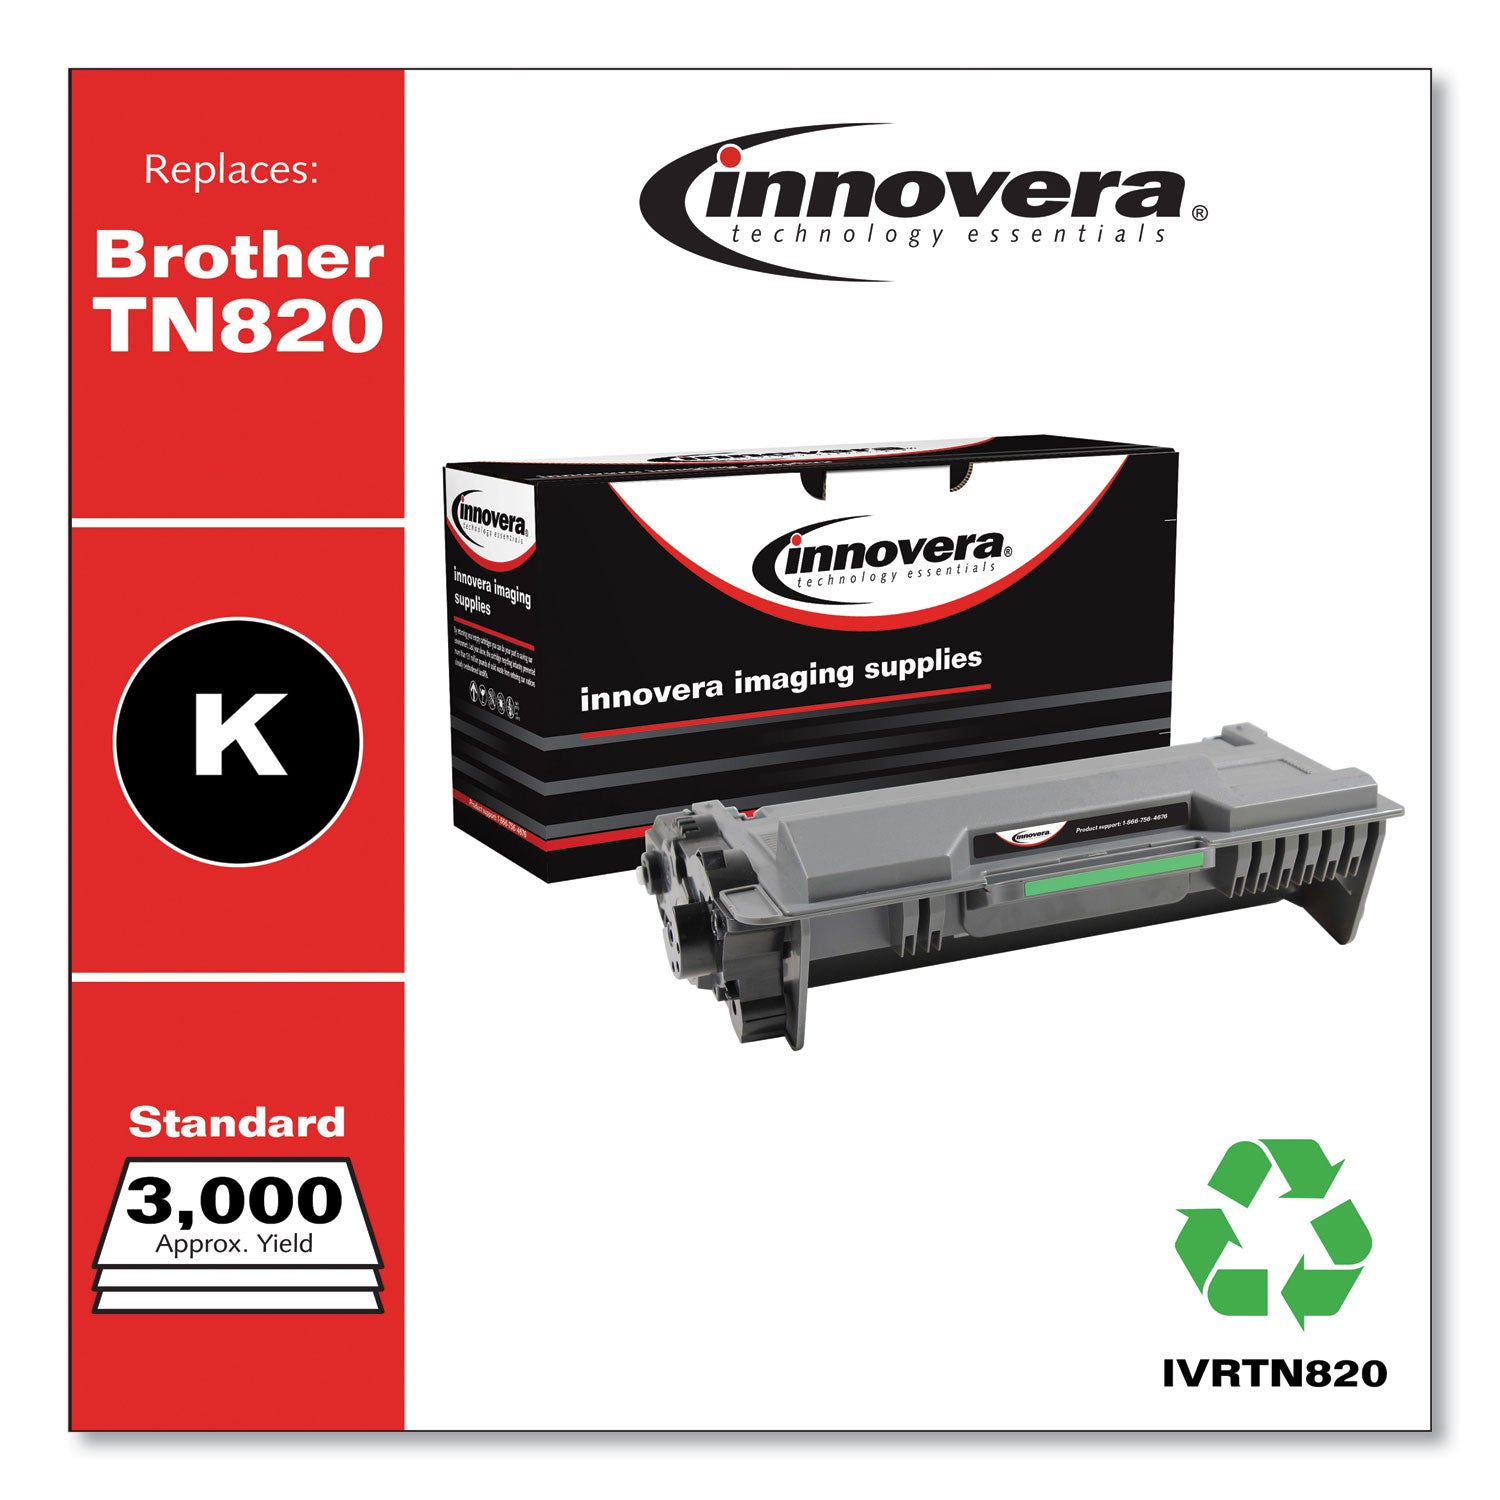 remanufactured-black-toner-replacement-for-tn820-3000-page-yield_ivrtn820 - 2